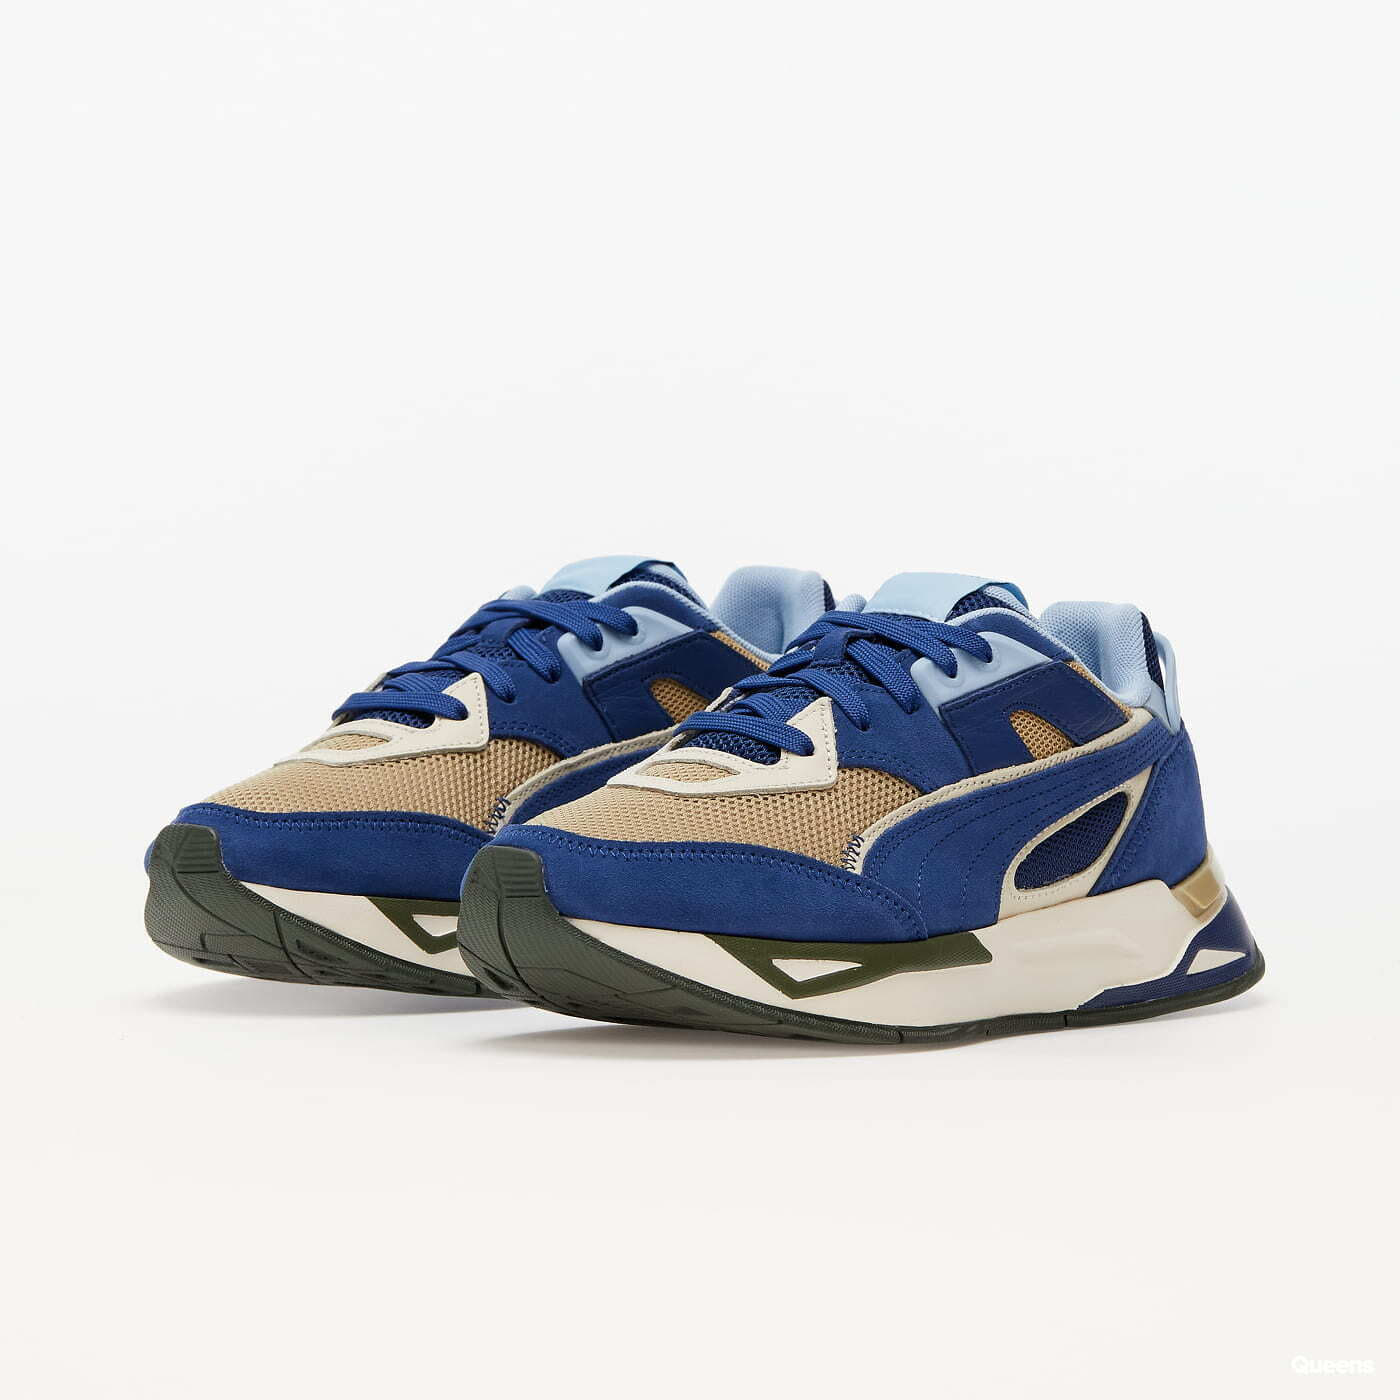 Women's sneakers and shoes Puma Mirage Sport KITSUNE blue depths-travertine